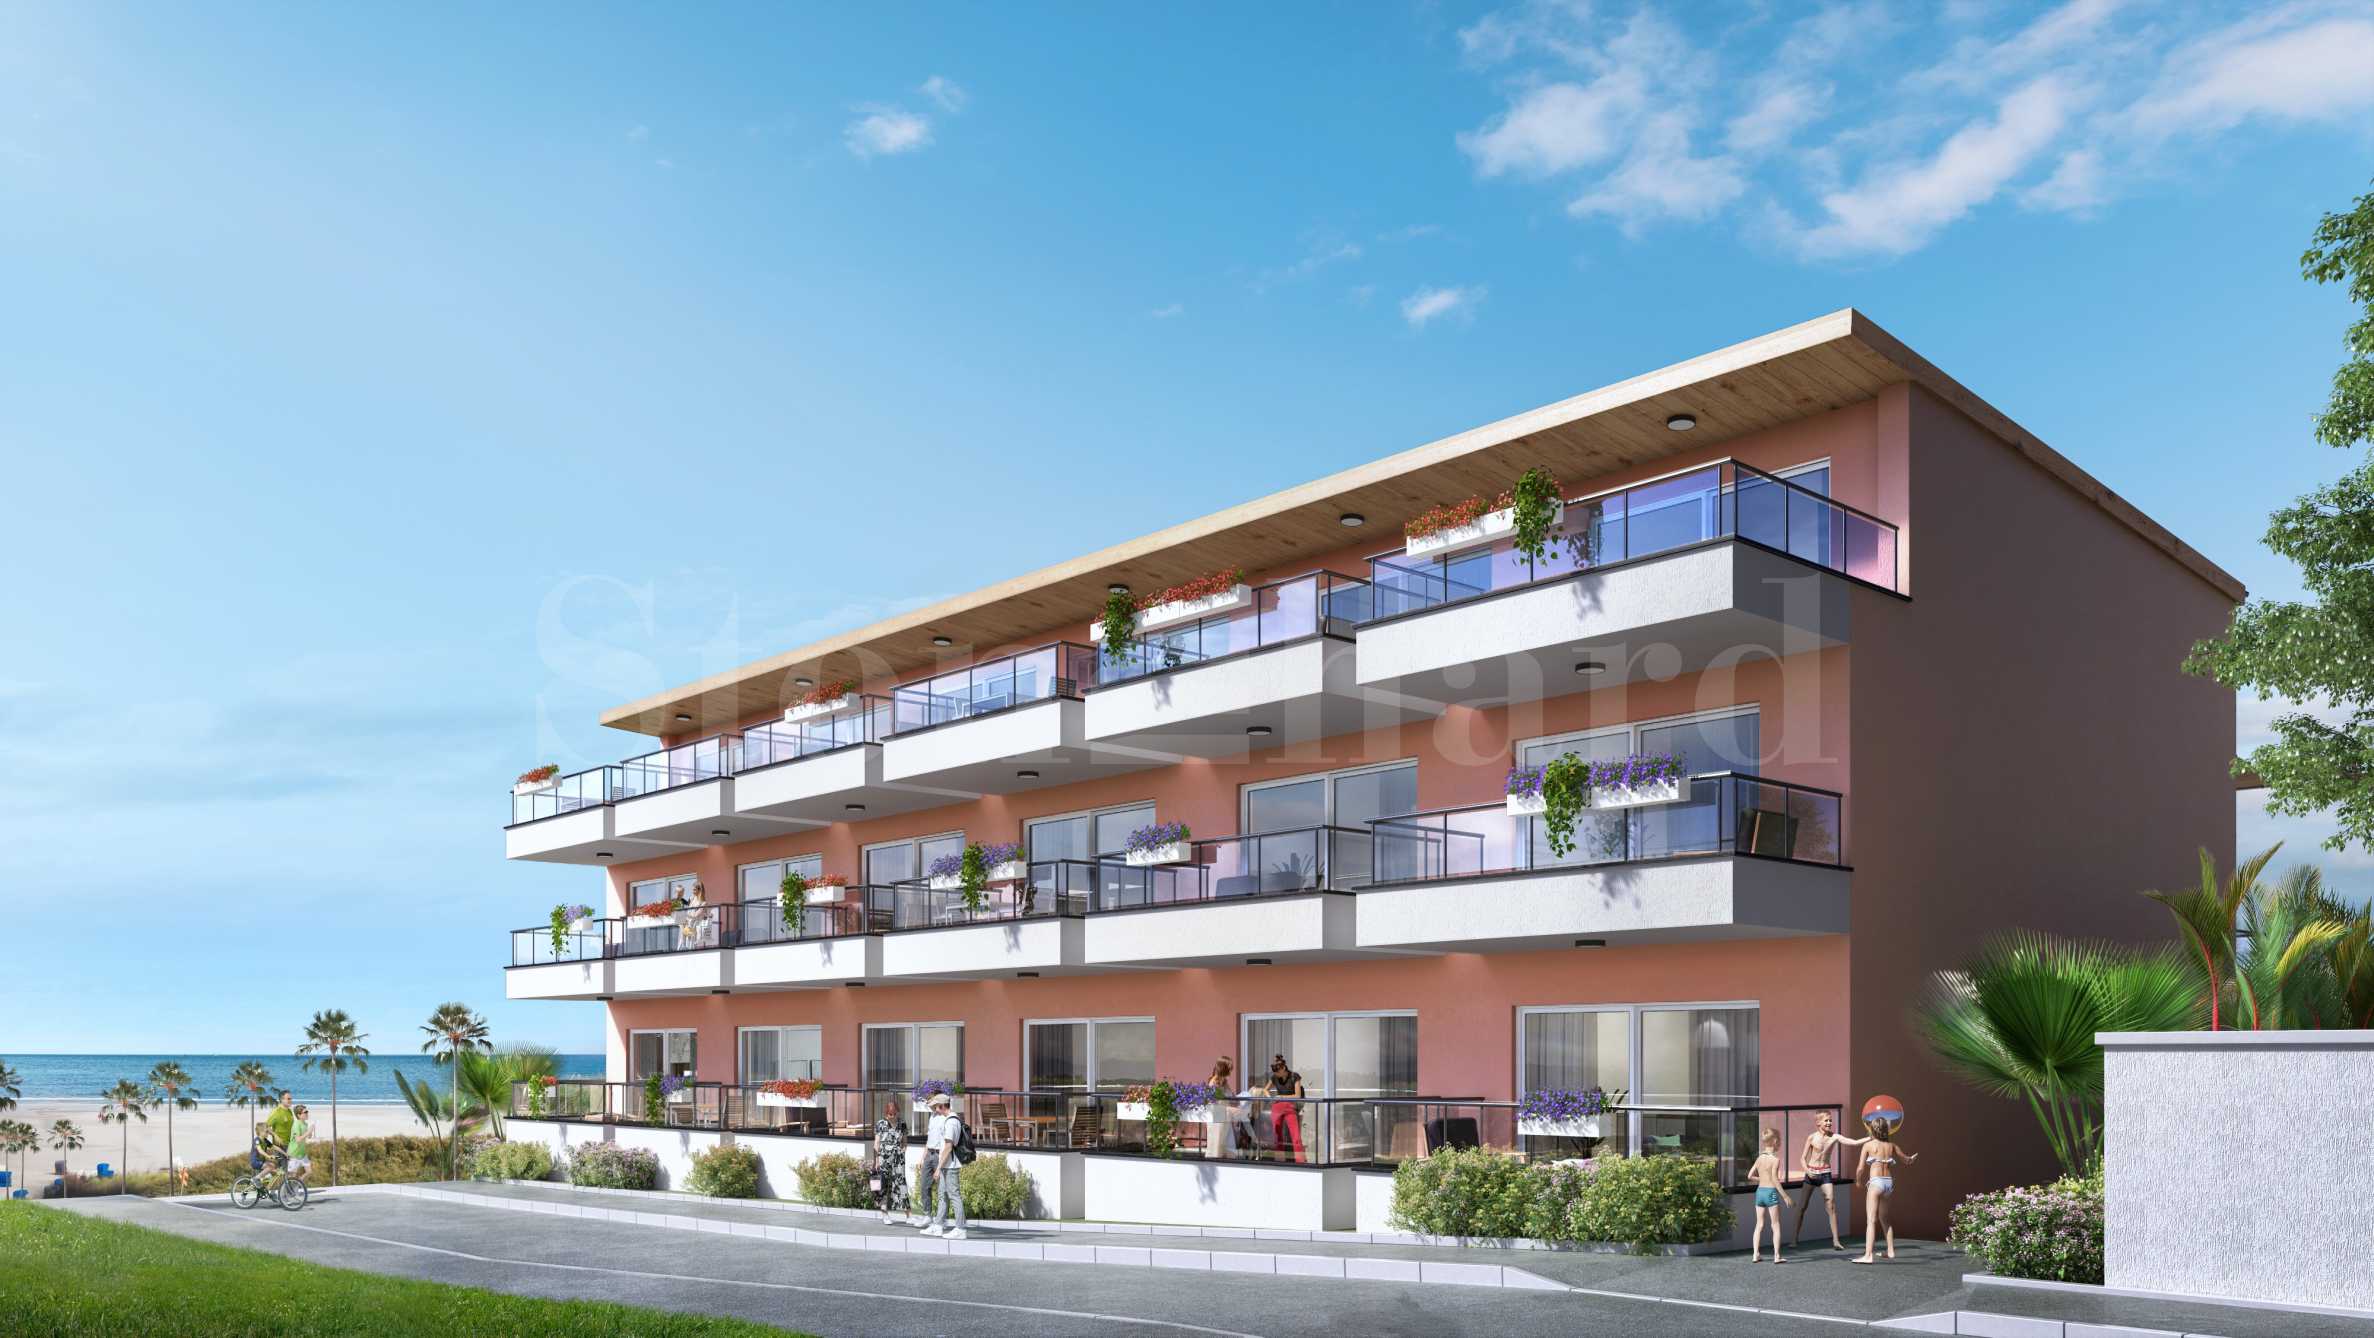 Newly built apartment in Sozopol, Halkidiki meters from the beach1 - Stonehard